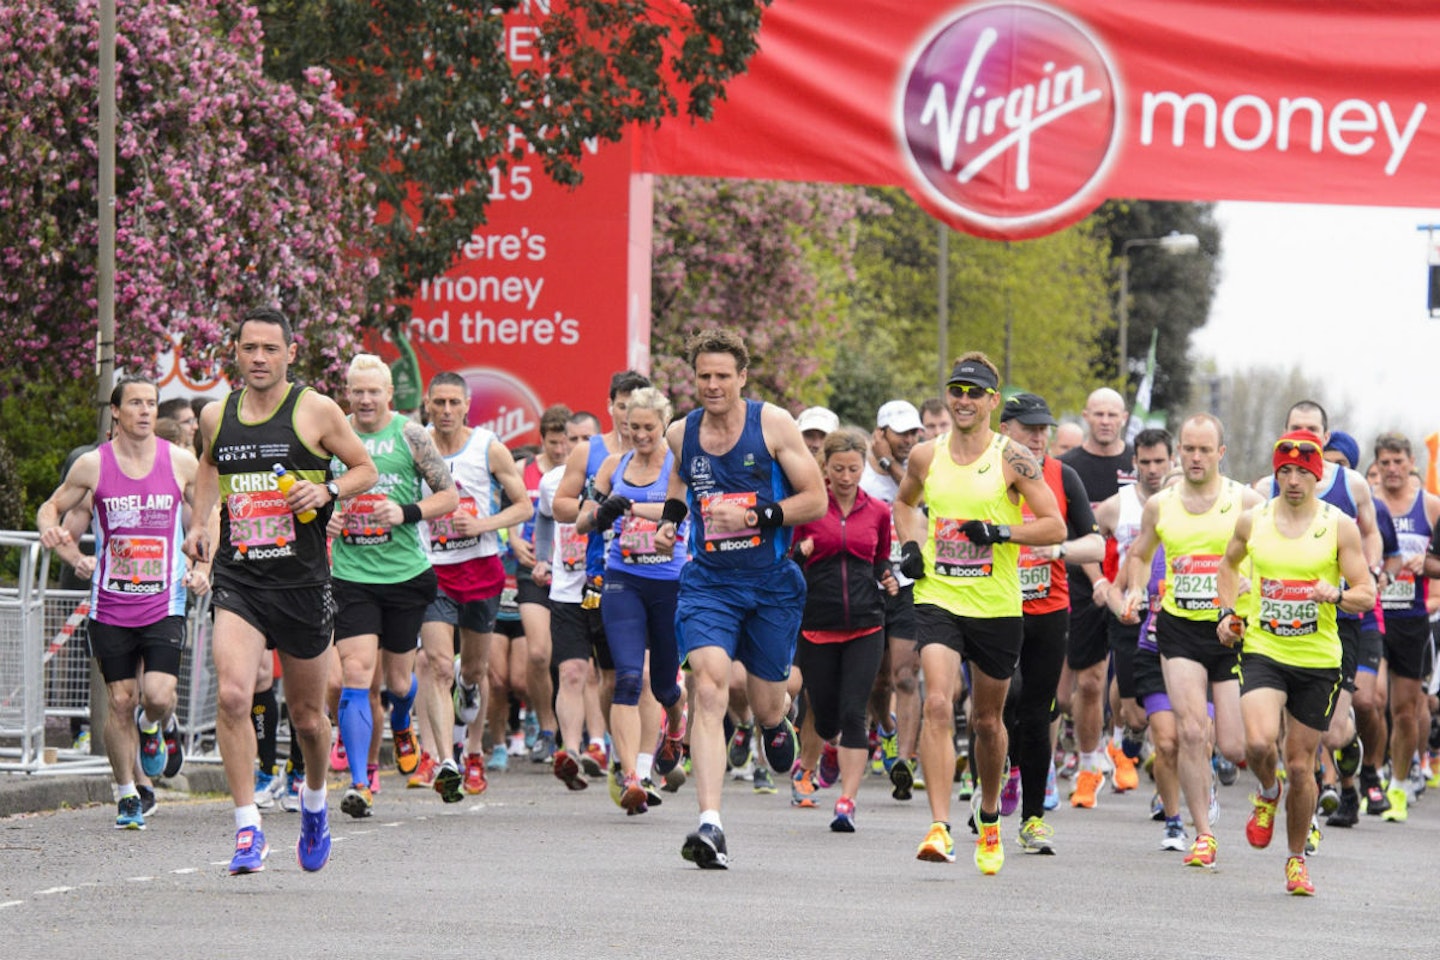 The London Marathon is 26.1 miles and a notoriously difficult race